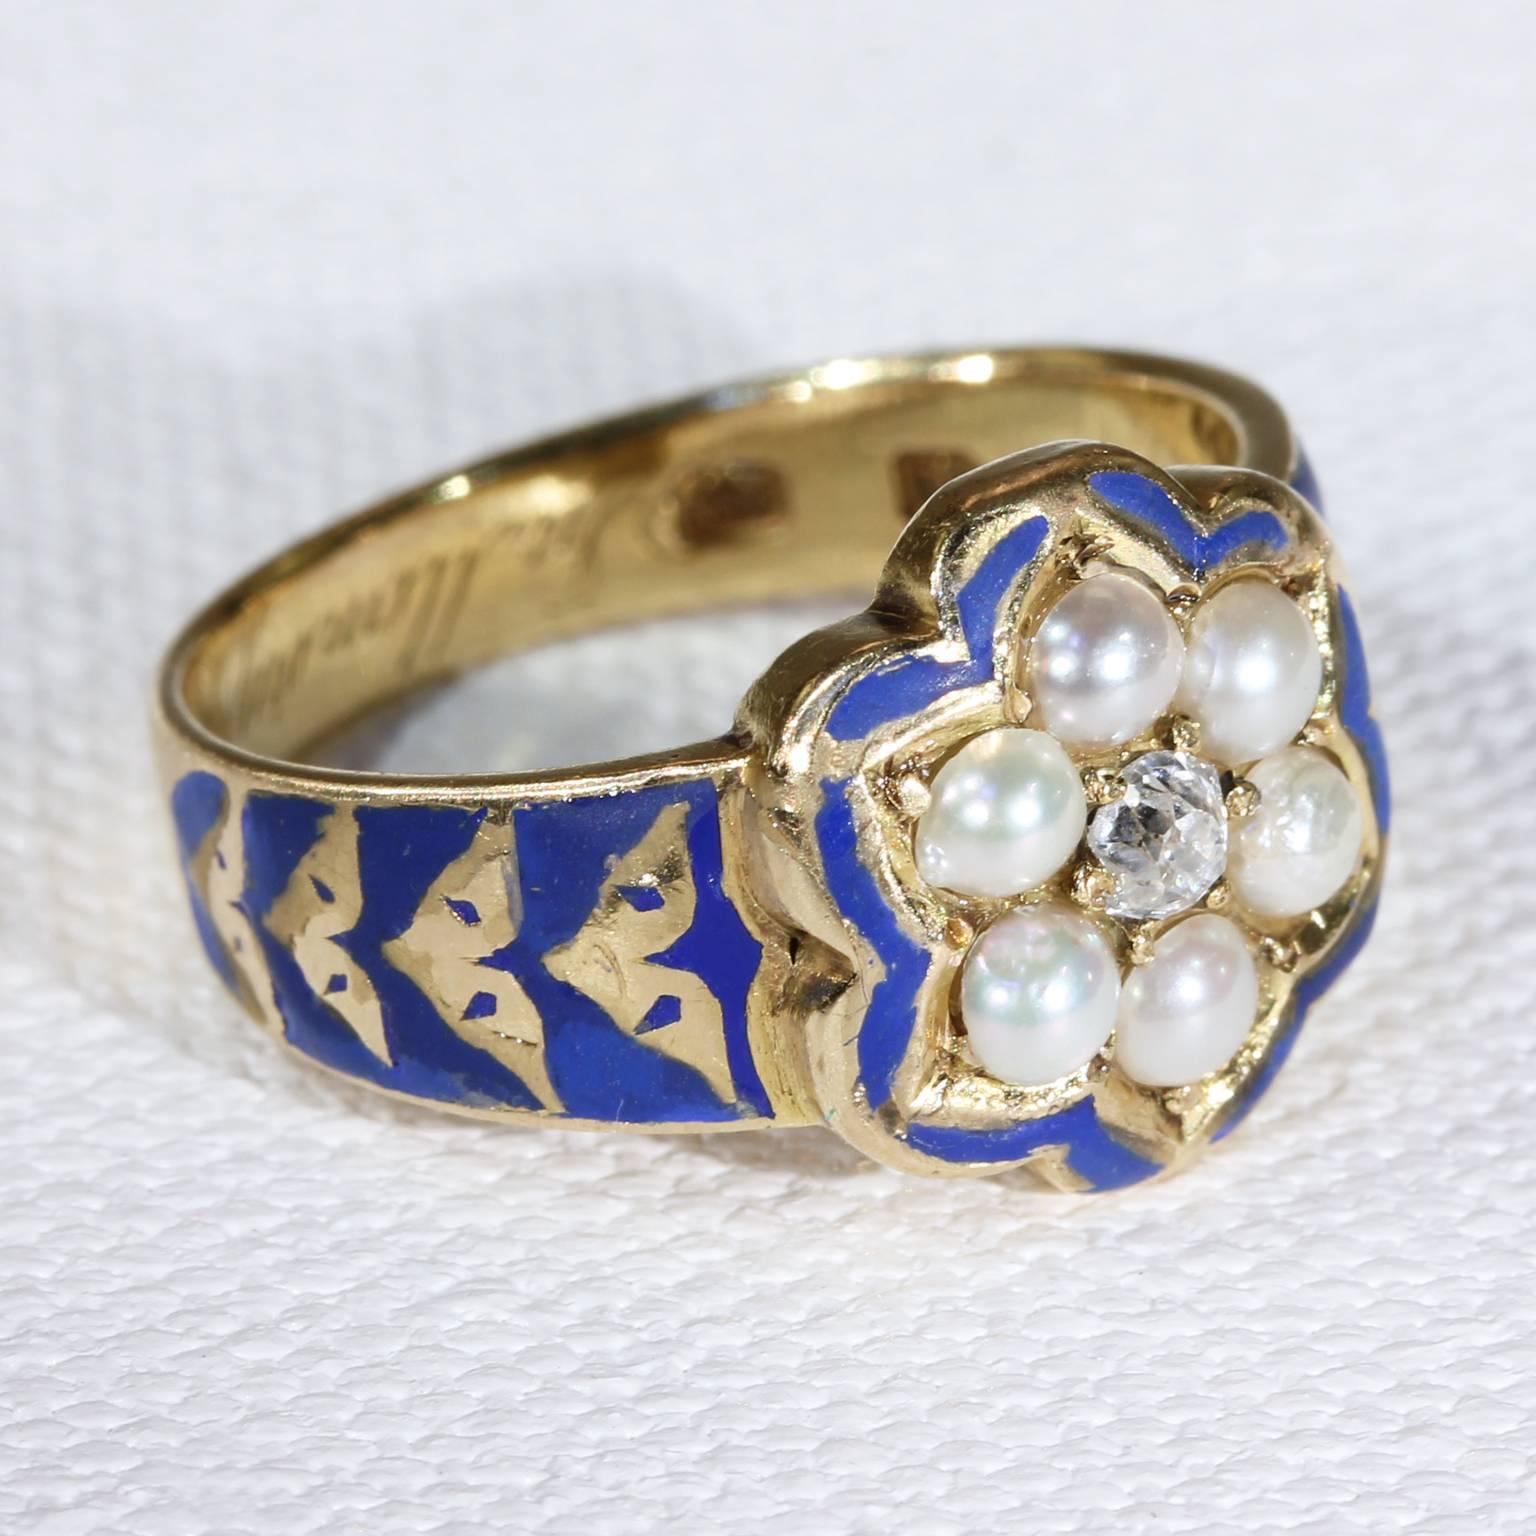 This lovely example of a mourning ring is set with six creamy white pearls, each 3 mm in diameter and one old European cut diamond at the center. It is unusual in that it is done in blue enamel, normally we see black or white on memorial rings. The